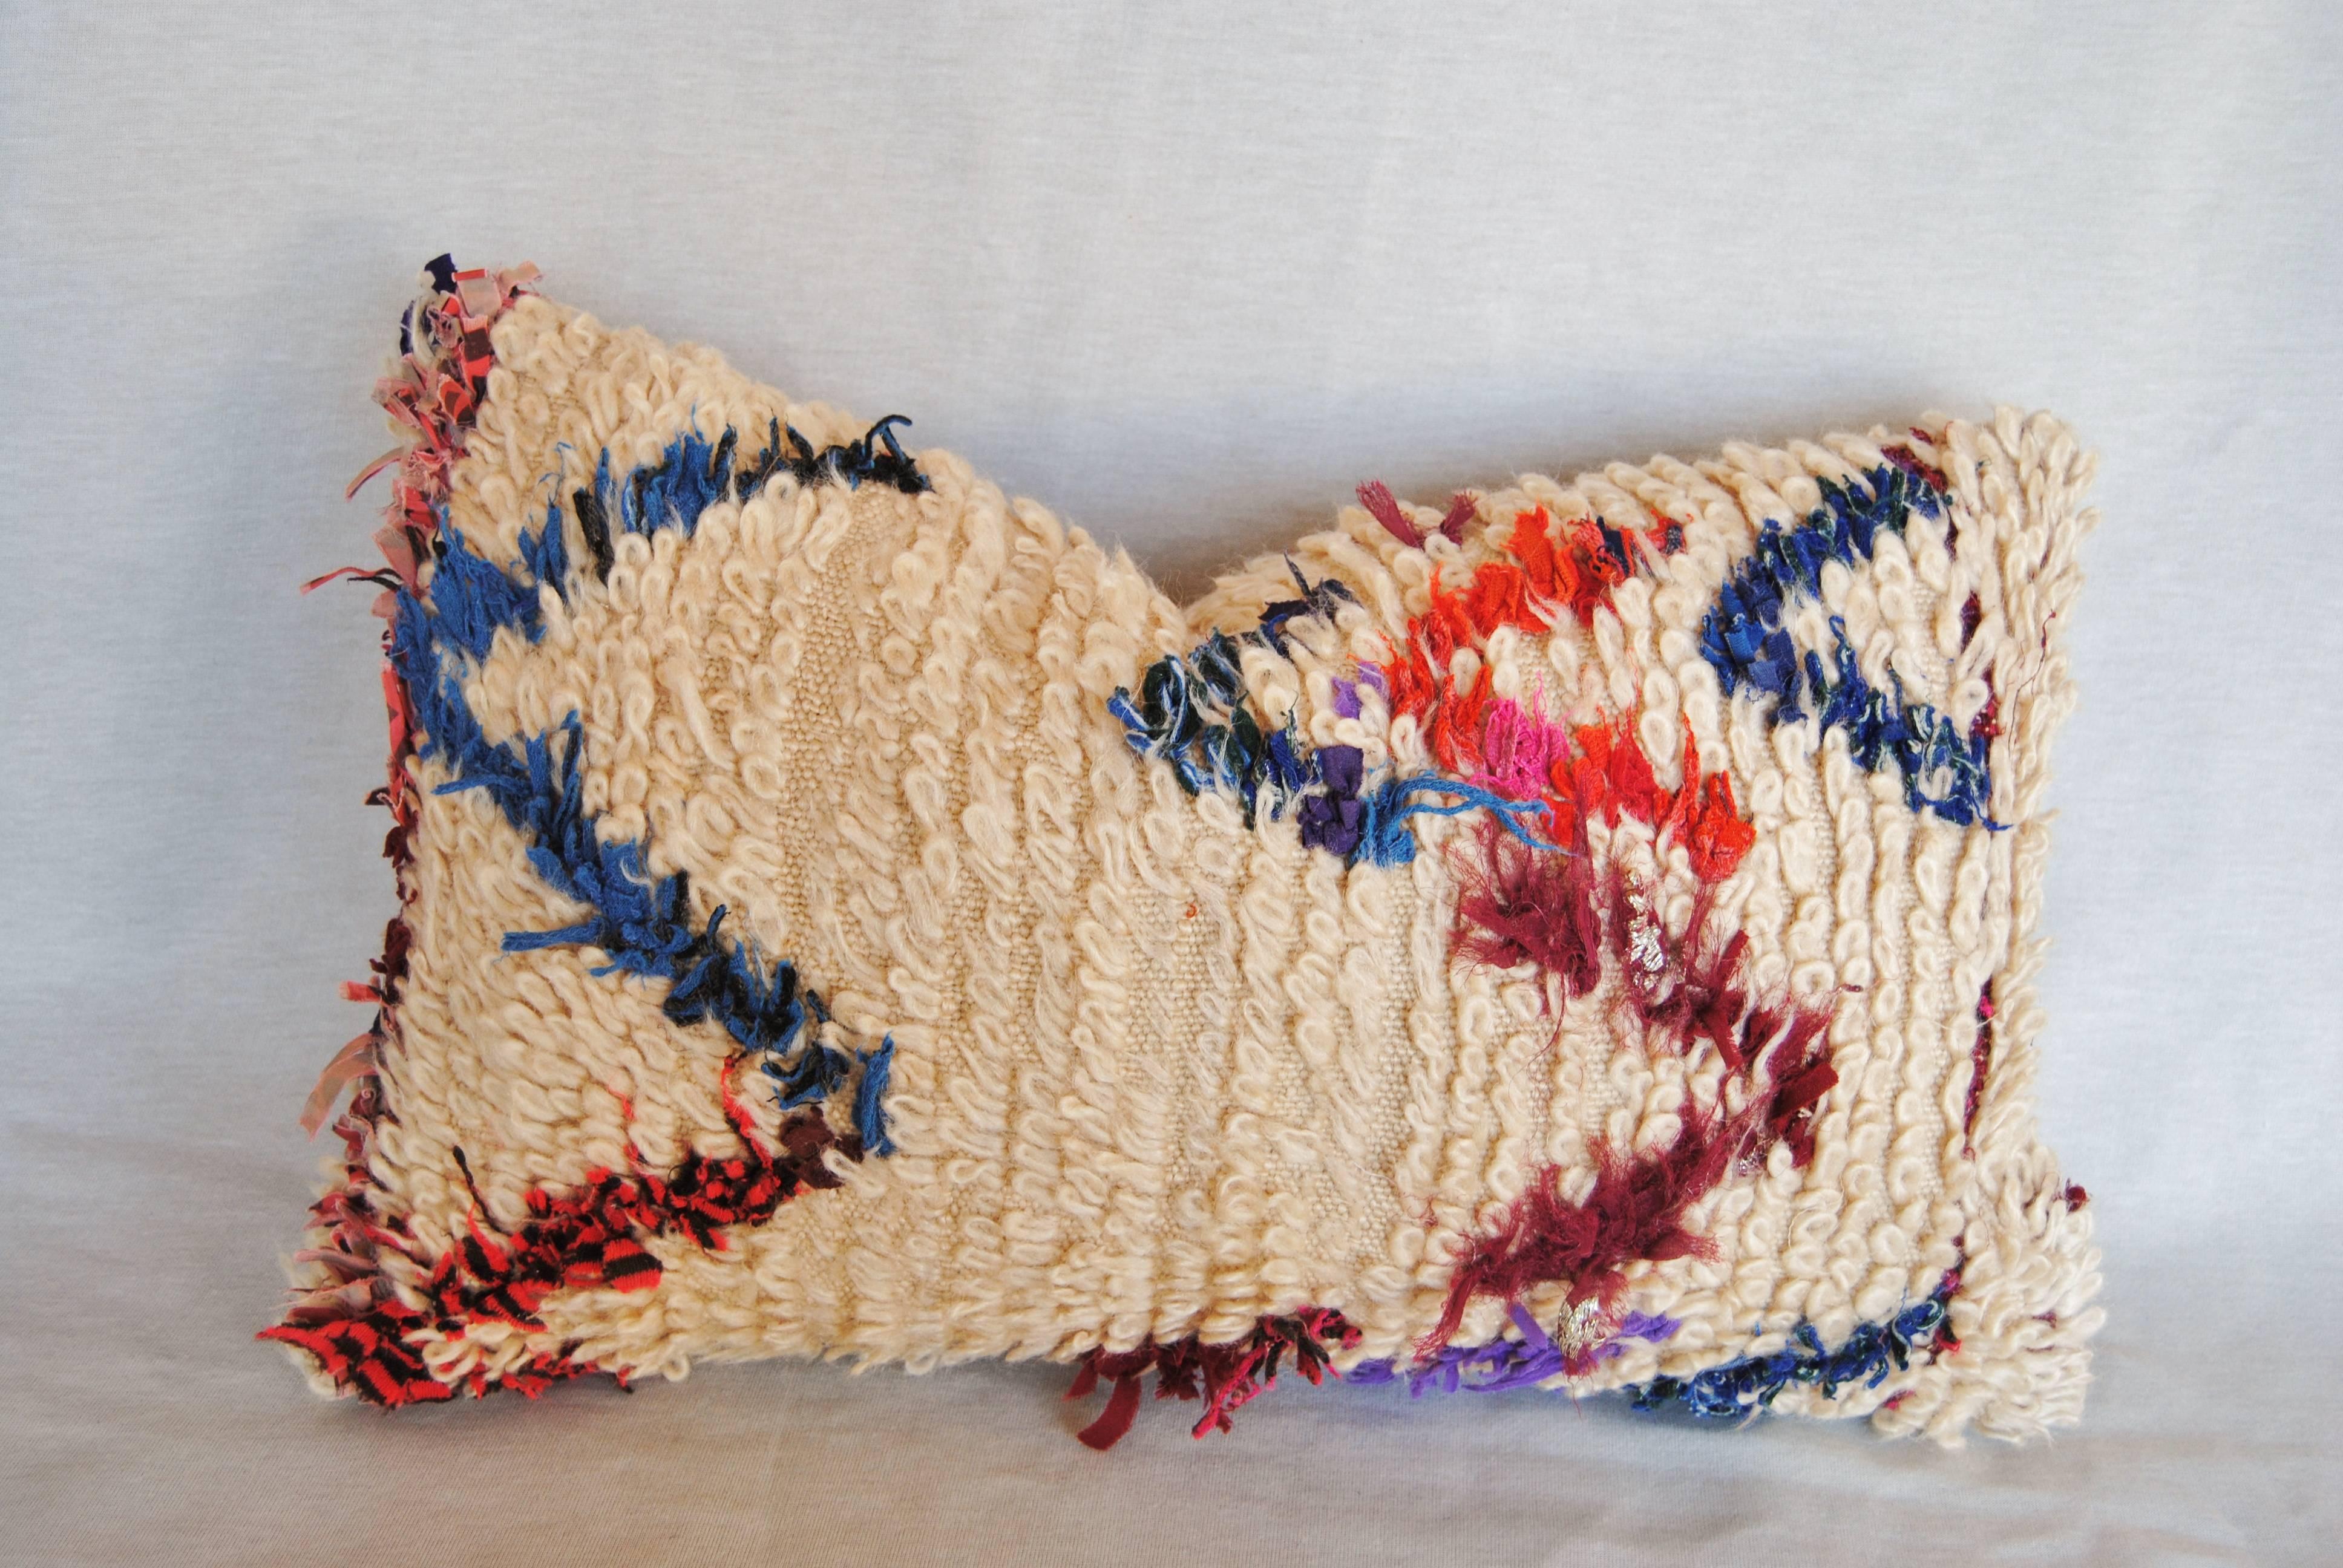 Vintage Moroccan Hand-Loomed Wool Beni Ourian Pillow, Atlas Mountains For Sale 2